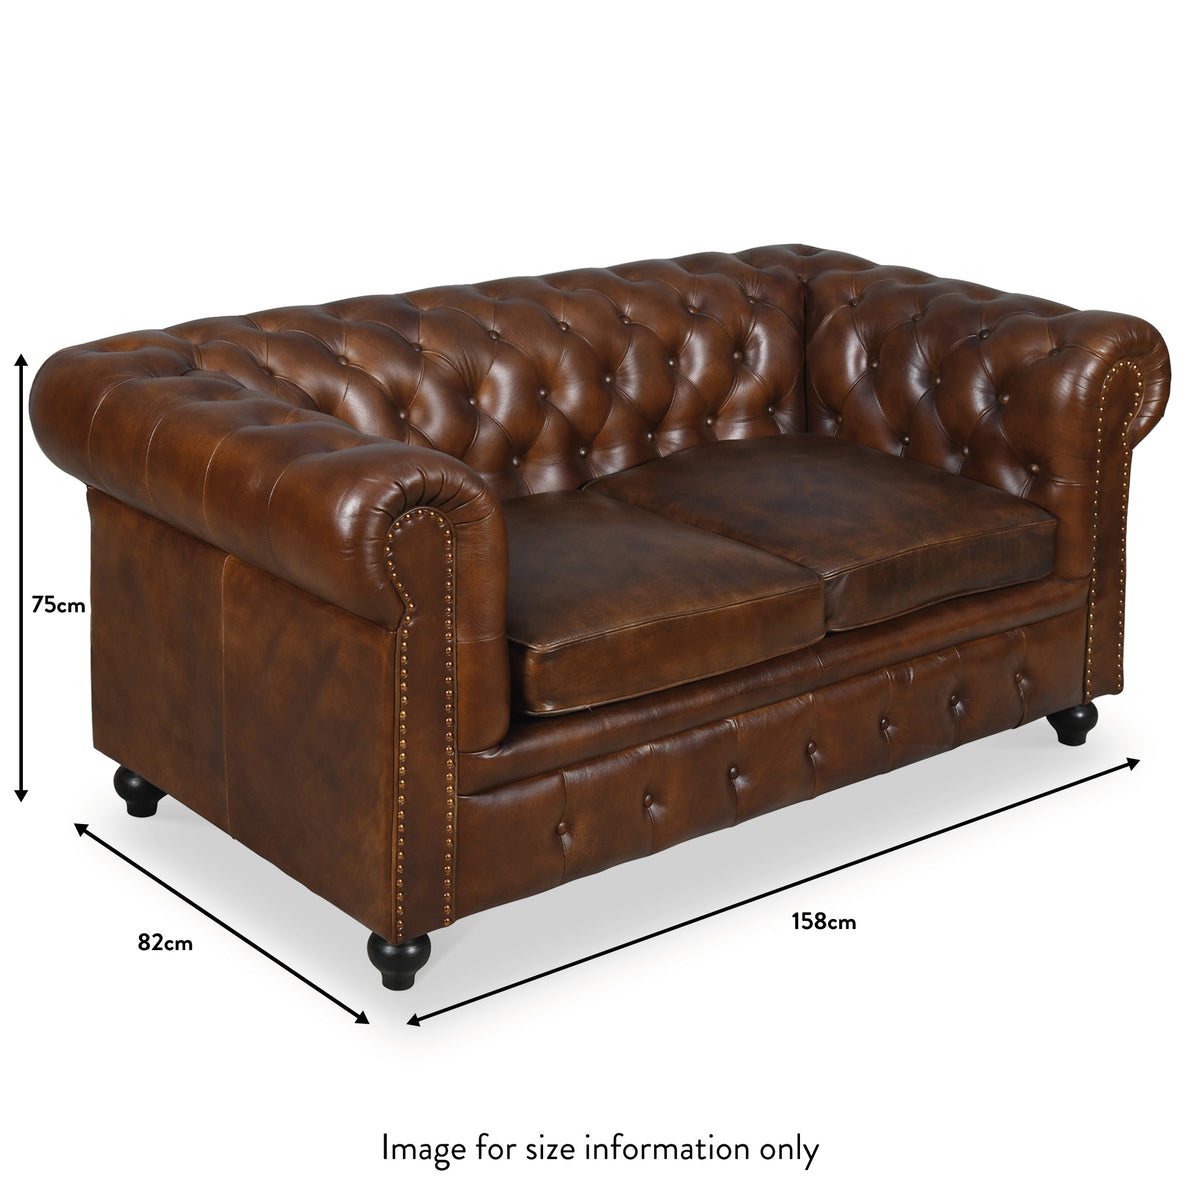 Nina Leather Chesterfield 2 Seat Sofa from Roseland